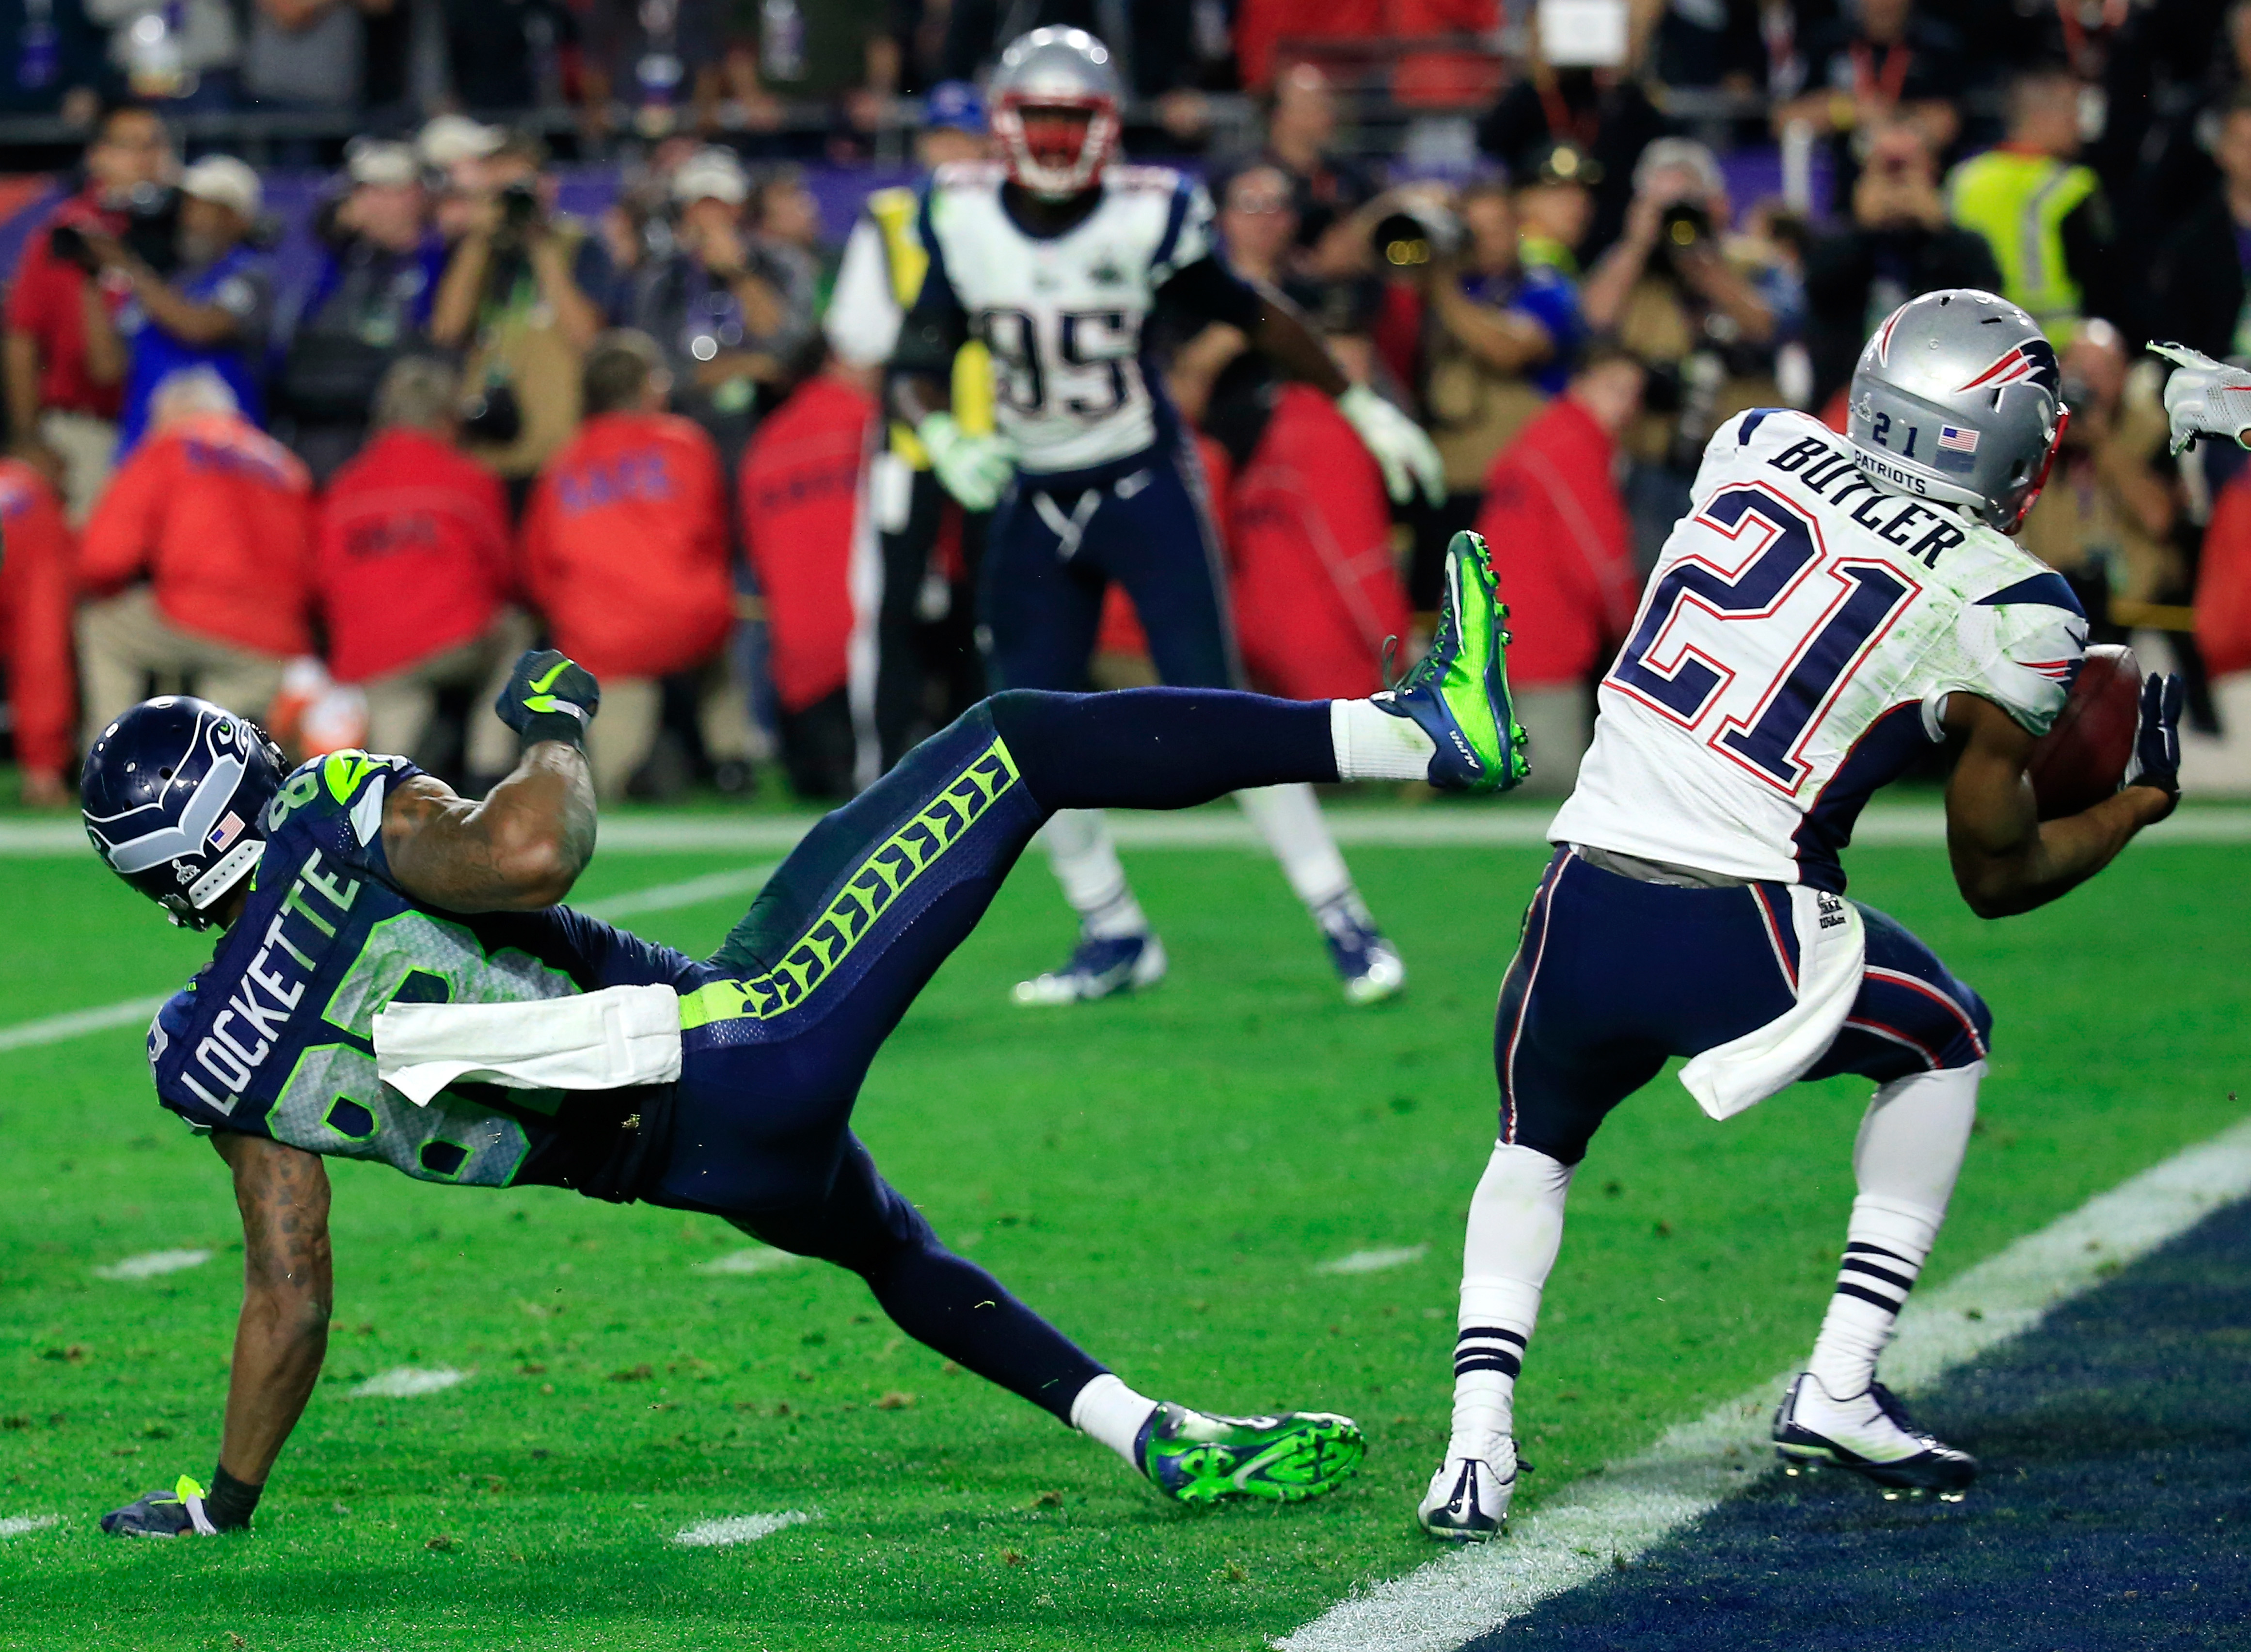 Malcolm Butler #21 of the New England Patriots intercepts a pass by Russell Wilson #3 of the Seattle Seahawks intended for  Ricardo Lockette #83 late in the fourth quarter during Super Bowl XLIX at University of Phoenix Stadium on February 1, 2015 in Glendale, Arizona. (Rob Carr&mdash;Getty Images)